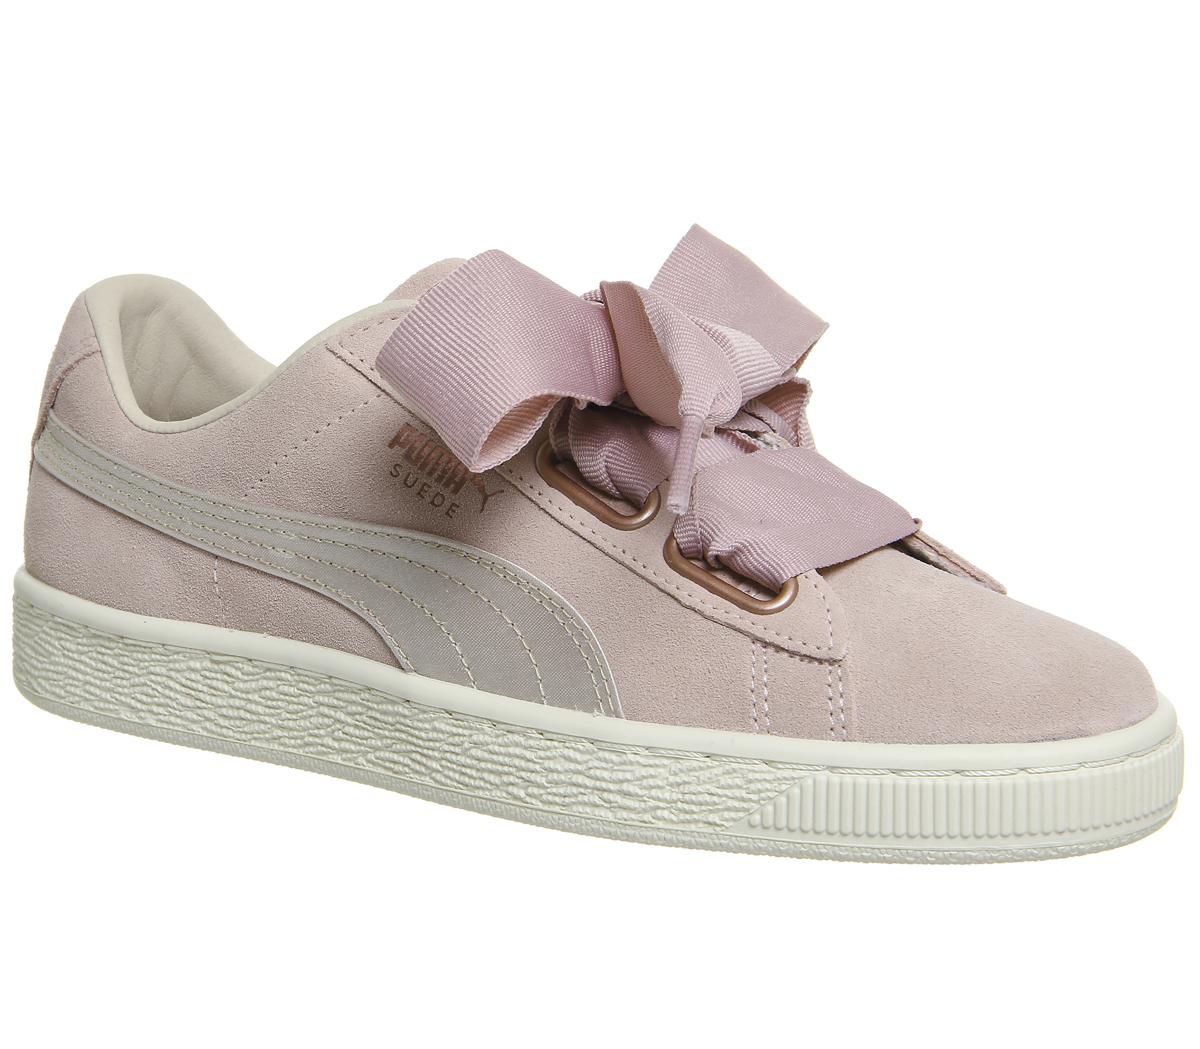 PUMASuede Heart TrainersSilver Pink Tint Rose Gold